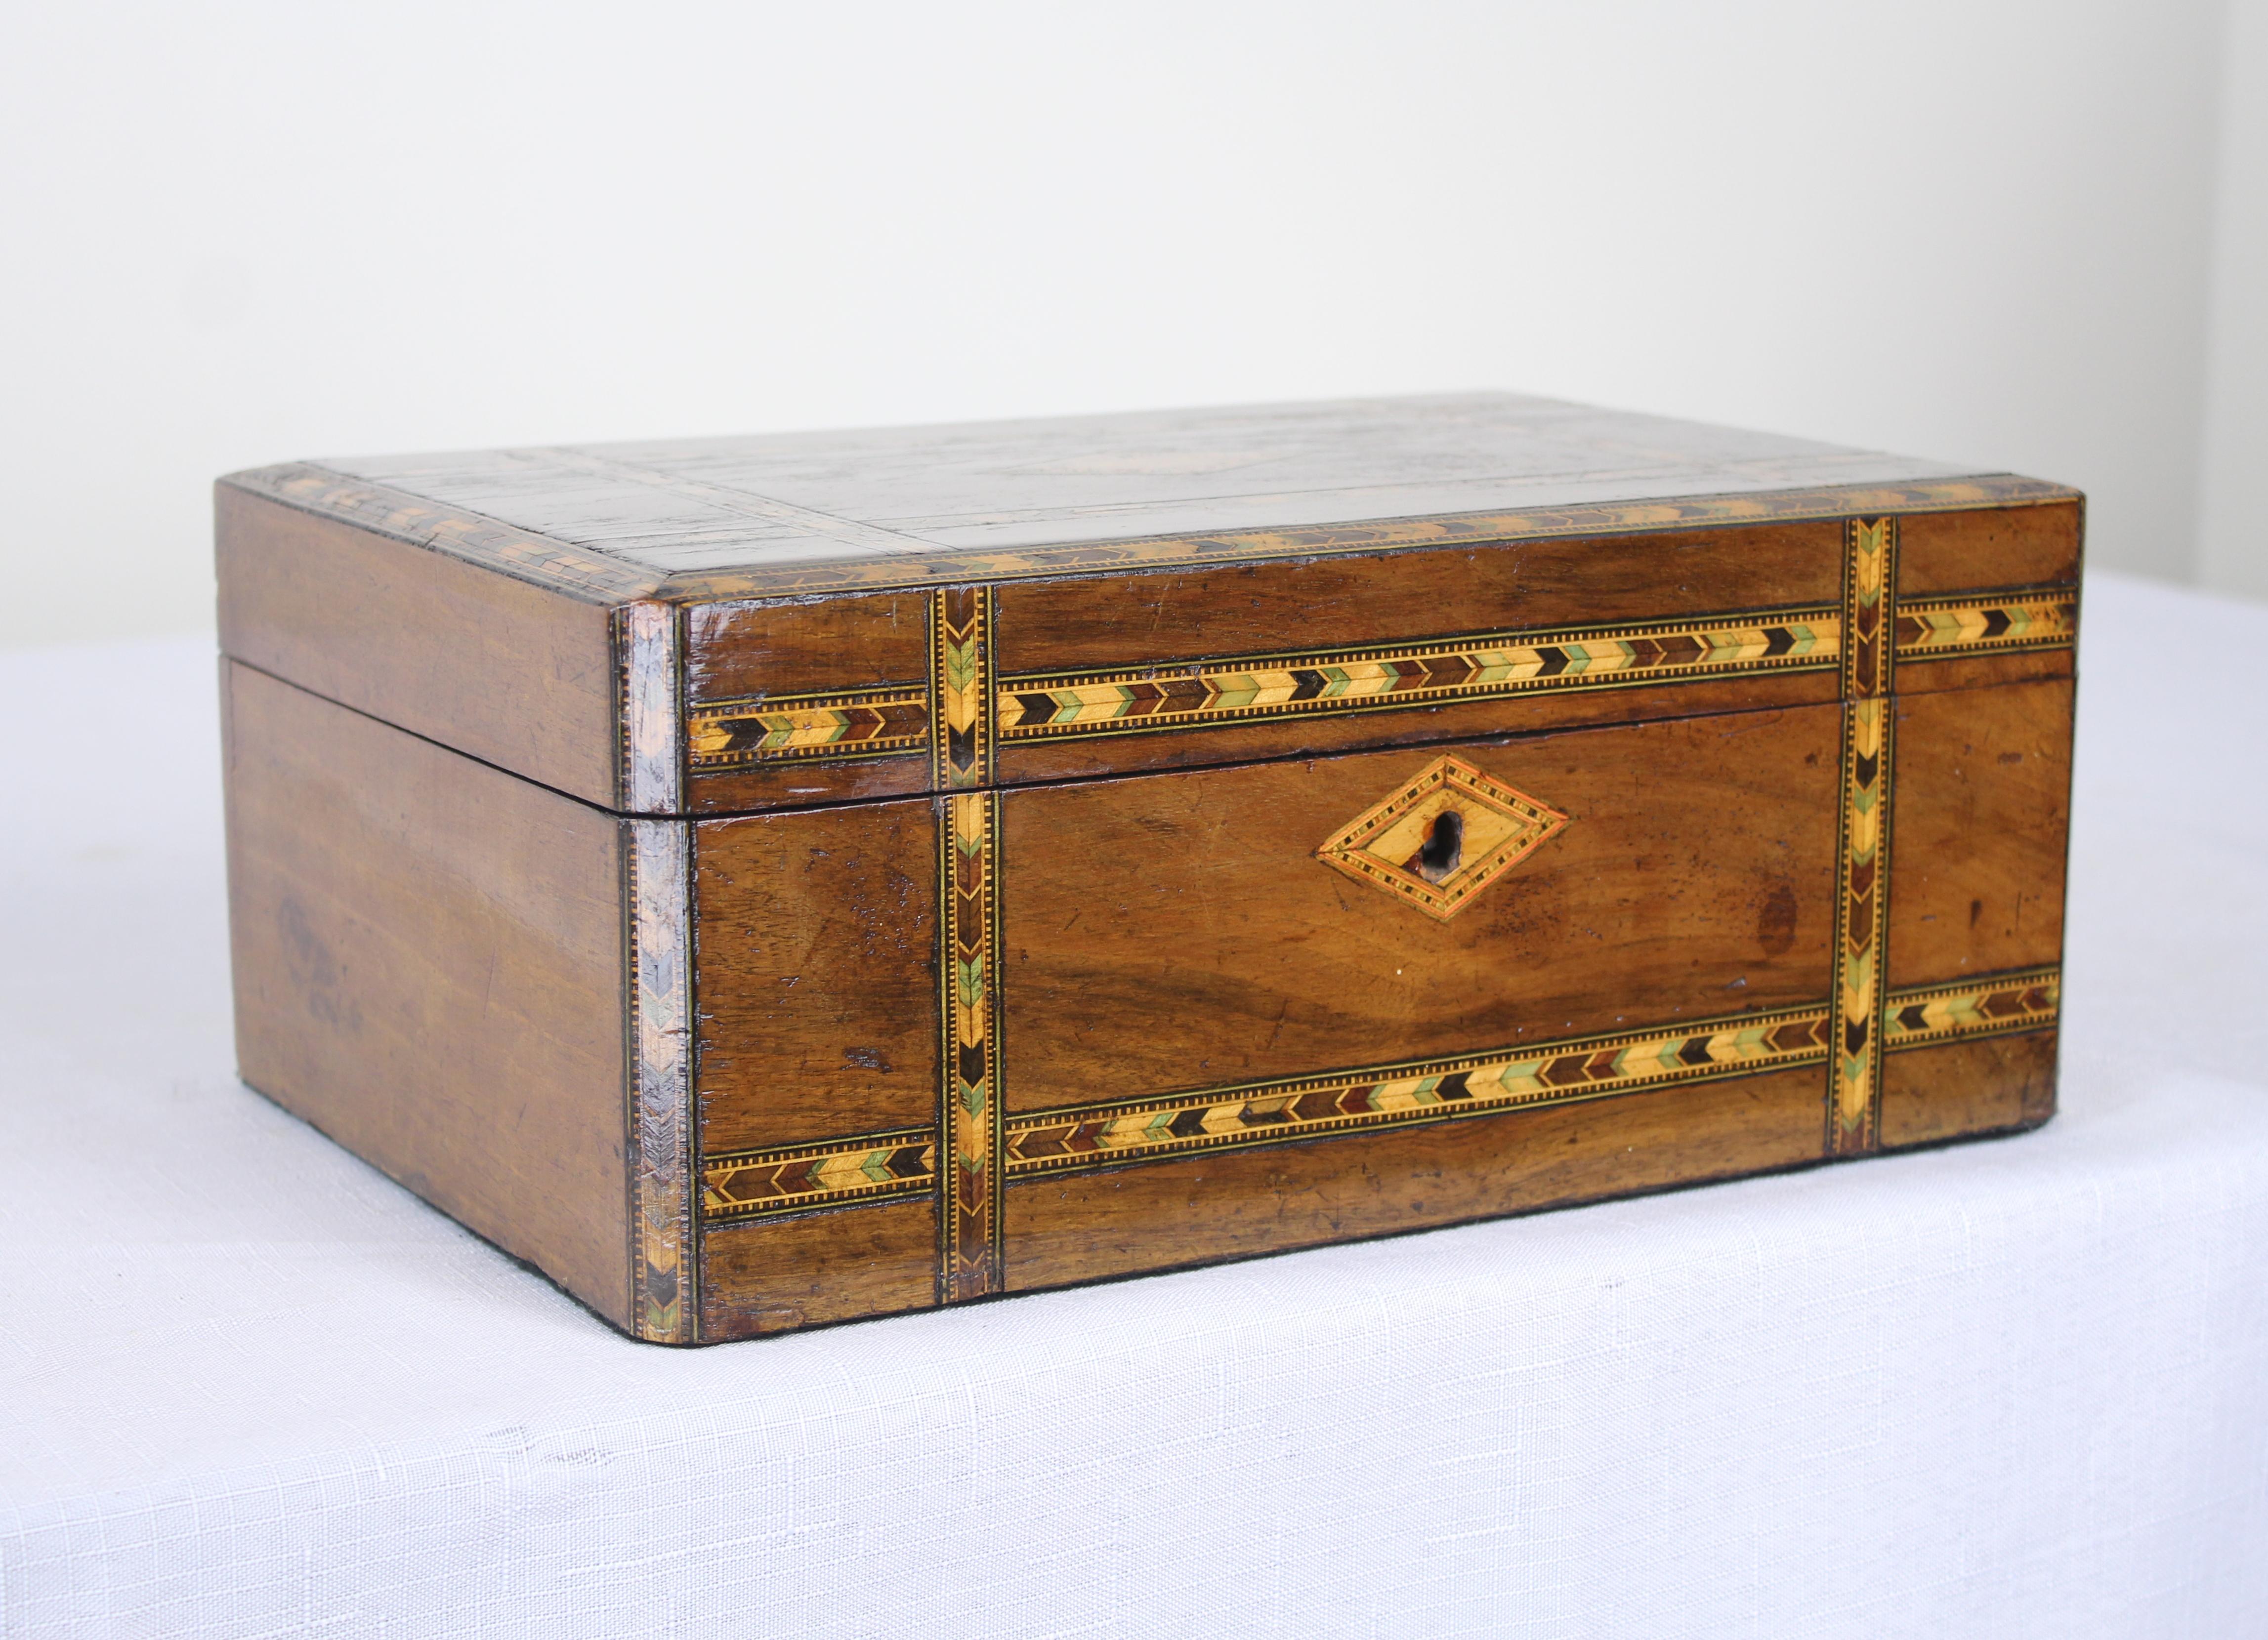 A decorative walnut Tumbridgeware box. Tumbridgeware being characterized as a form of decoratively inlaid woodwork, typically in the form of boxes, that is characteristic of Tumbridge and the spa town of Royal Tumbridge Wells in Kent in the 18th and